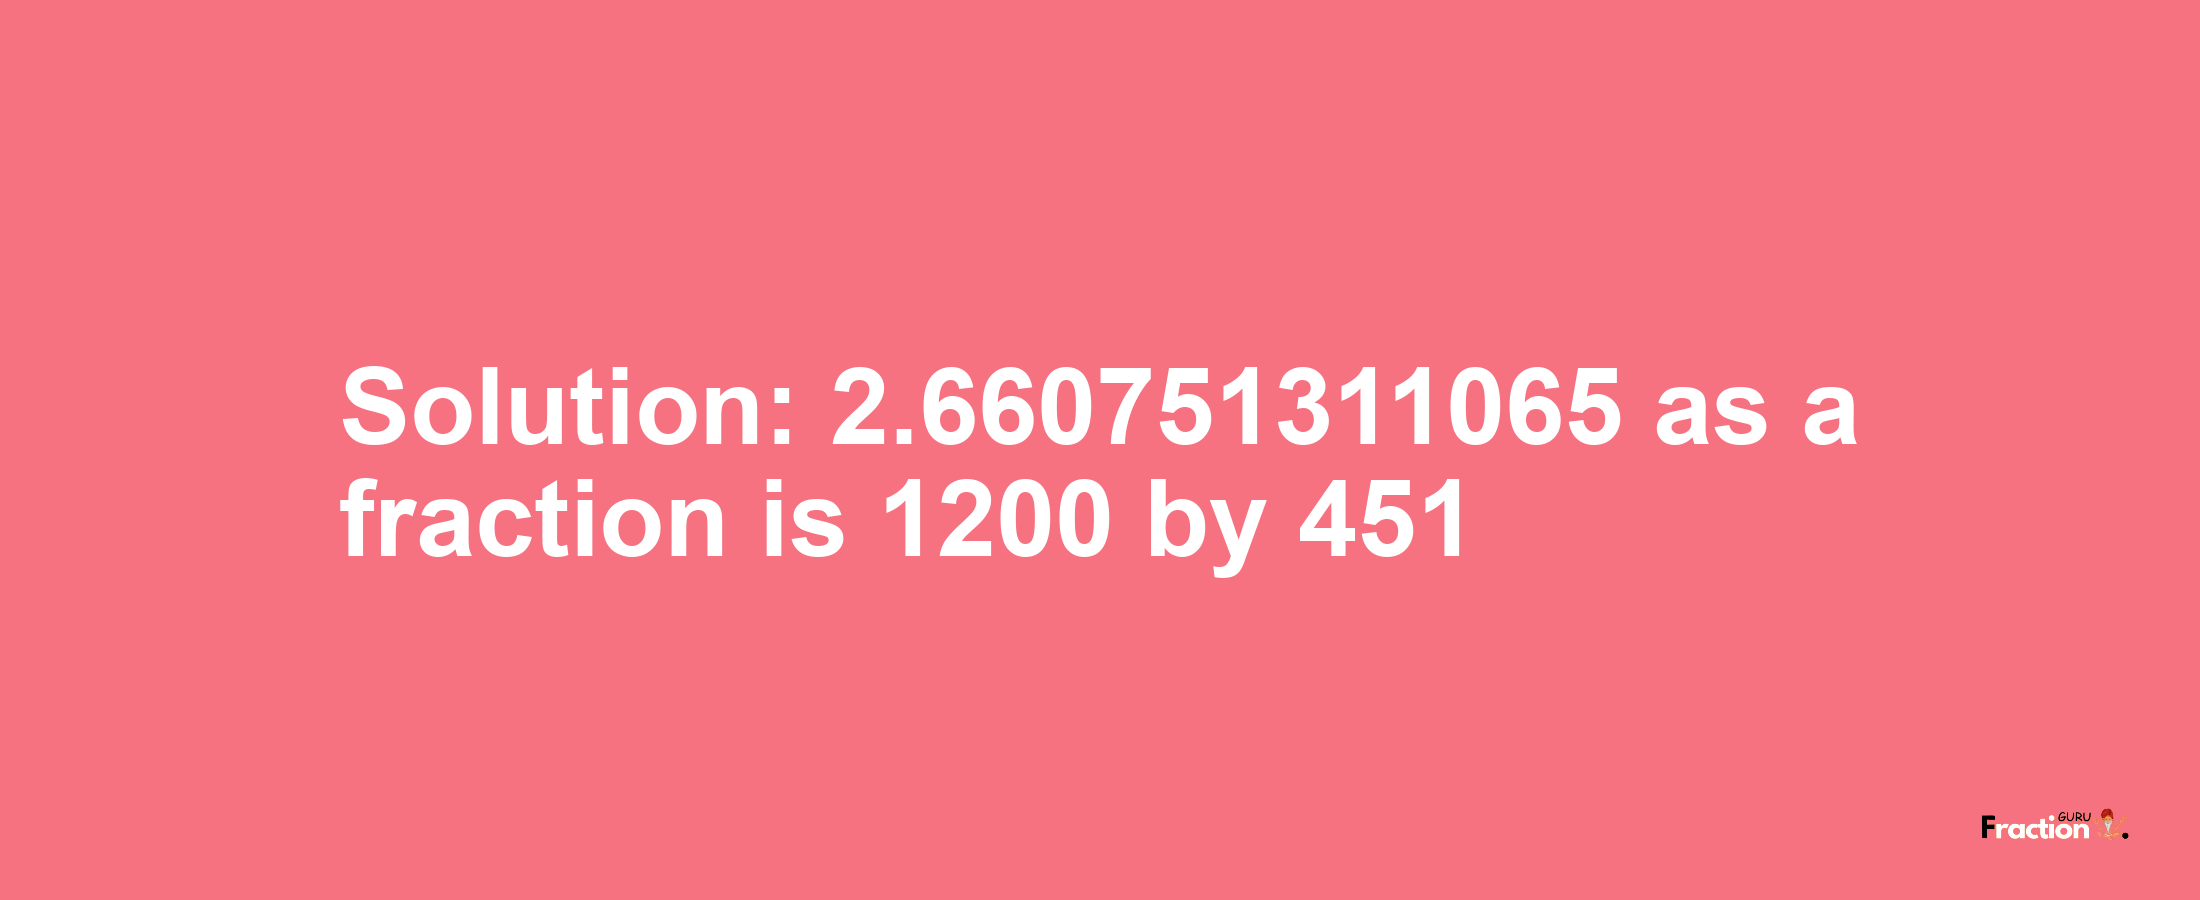 Solution:2.660751311065 as a fraction is 1200/451